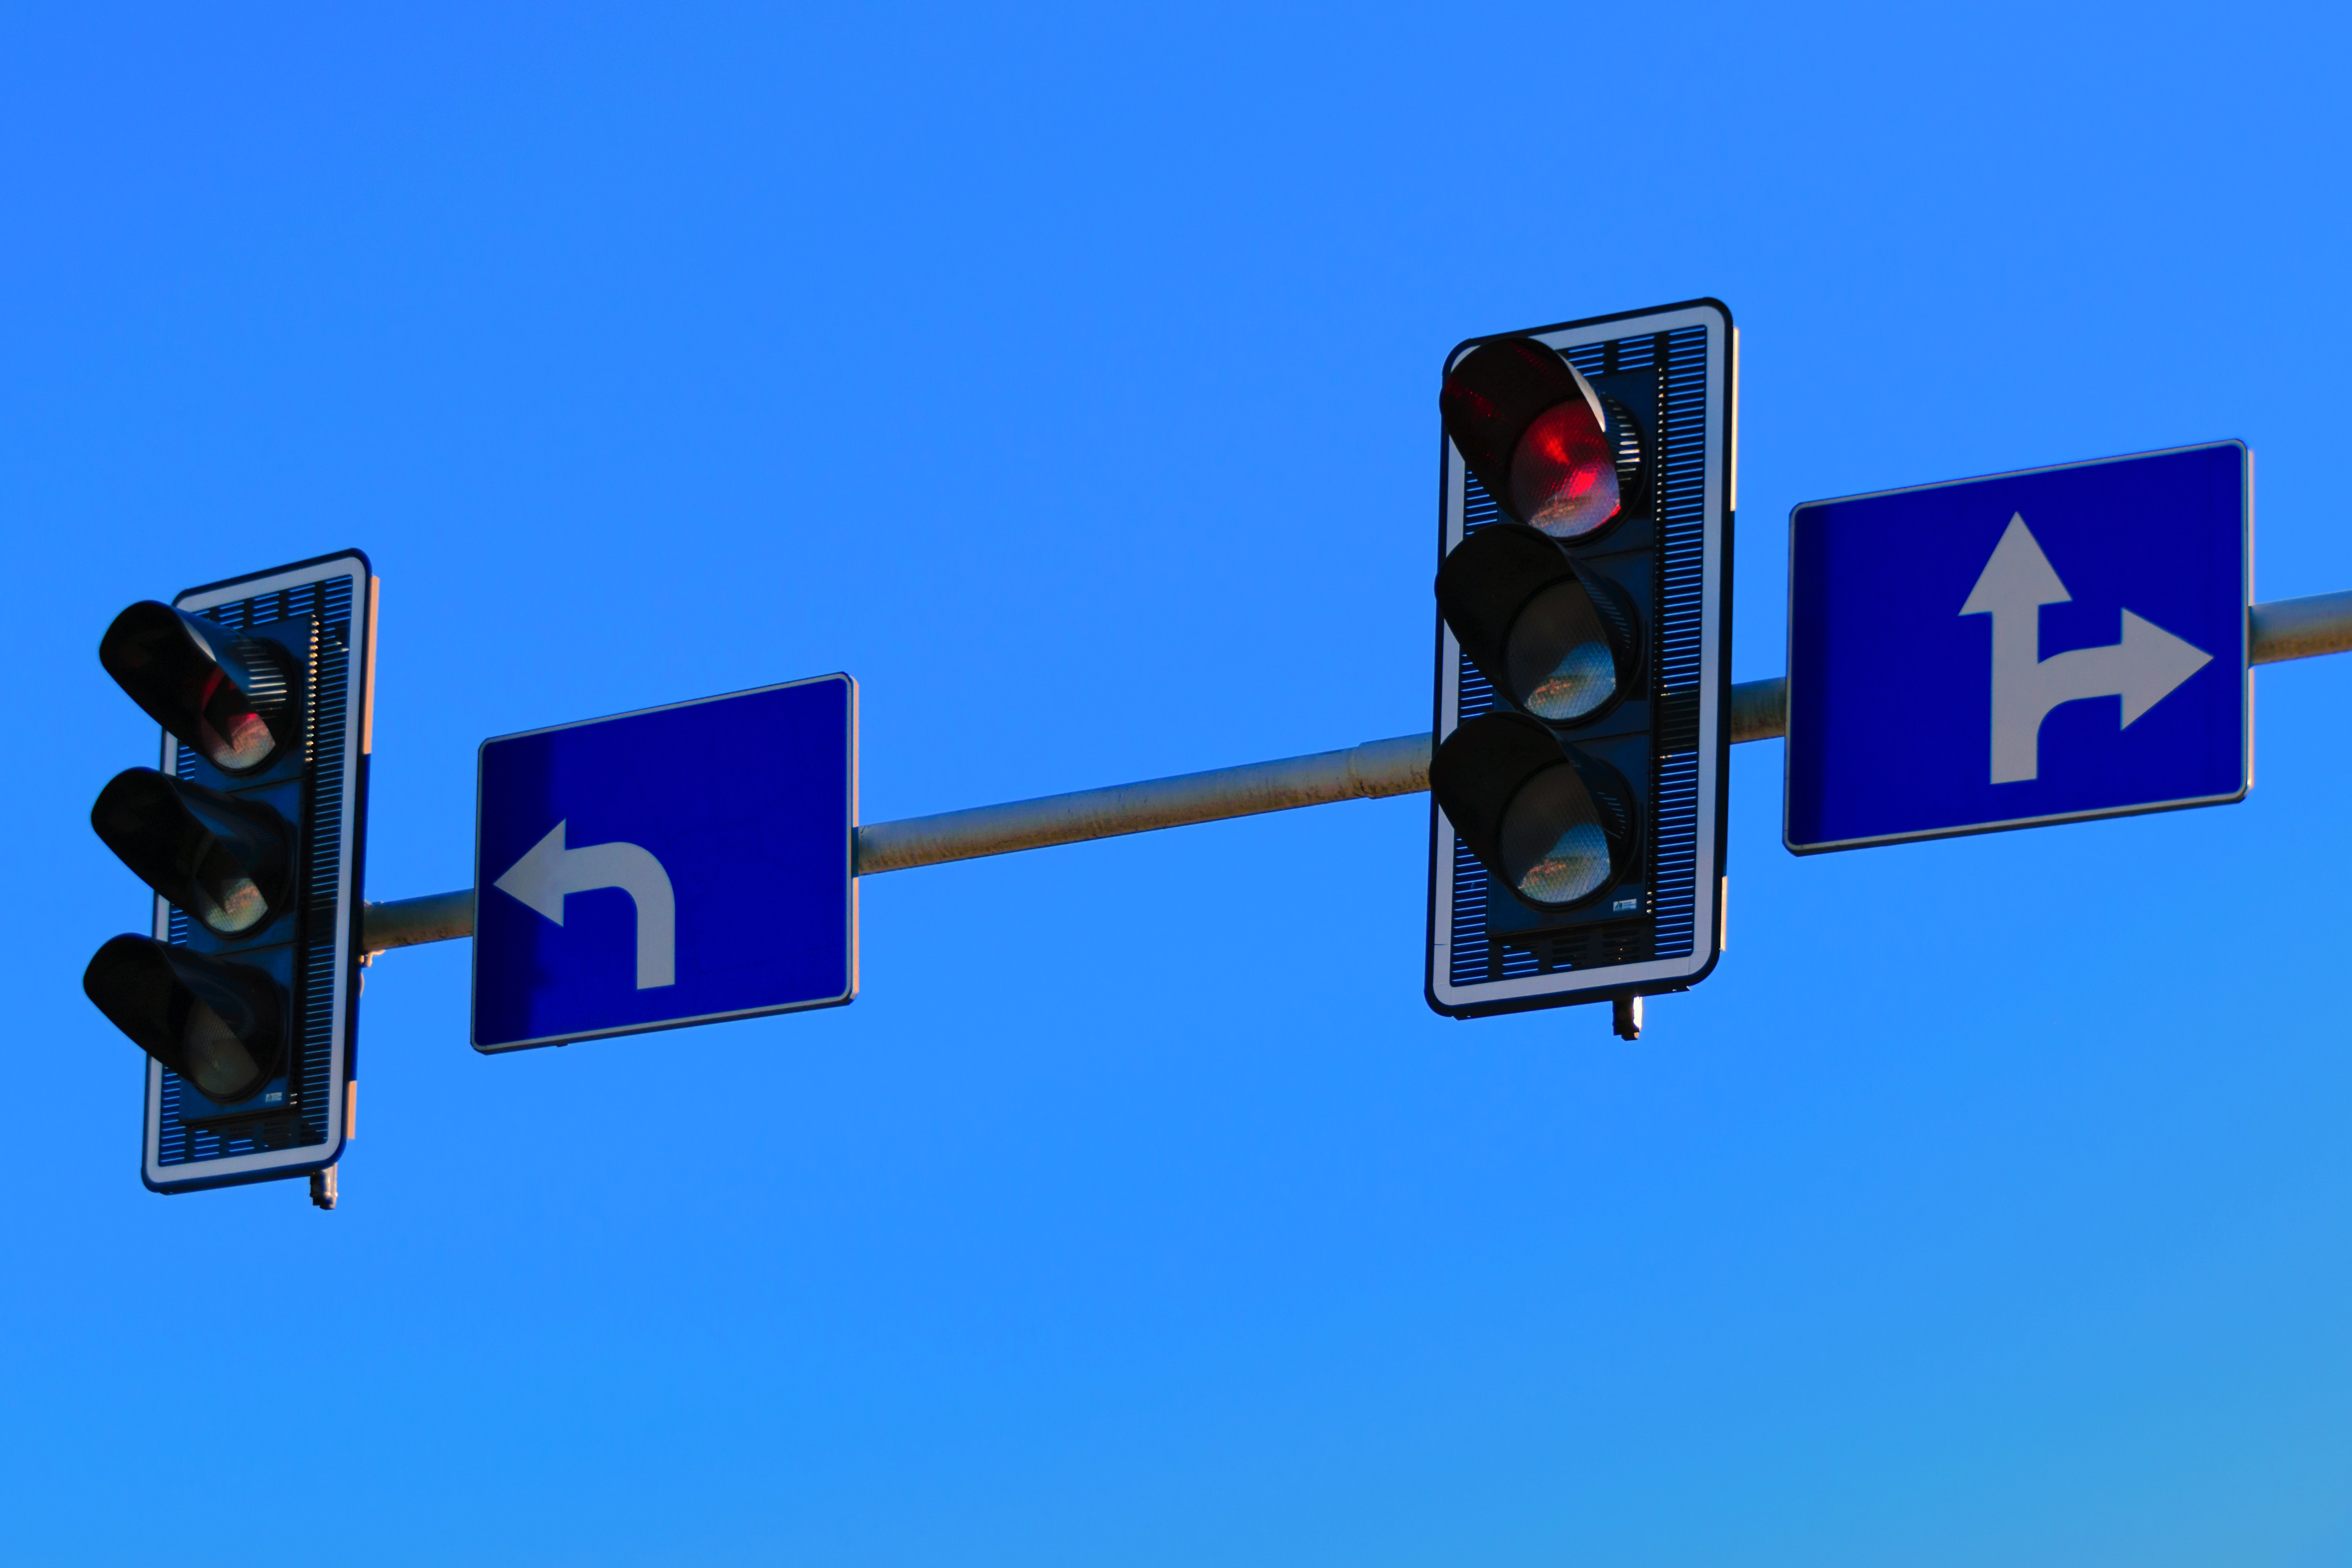 Traffic lights with red light on photo